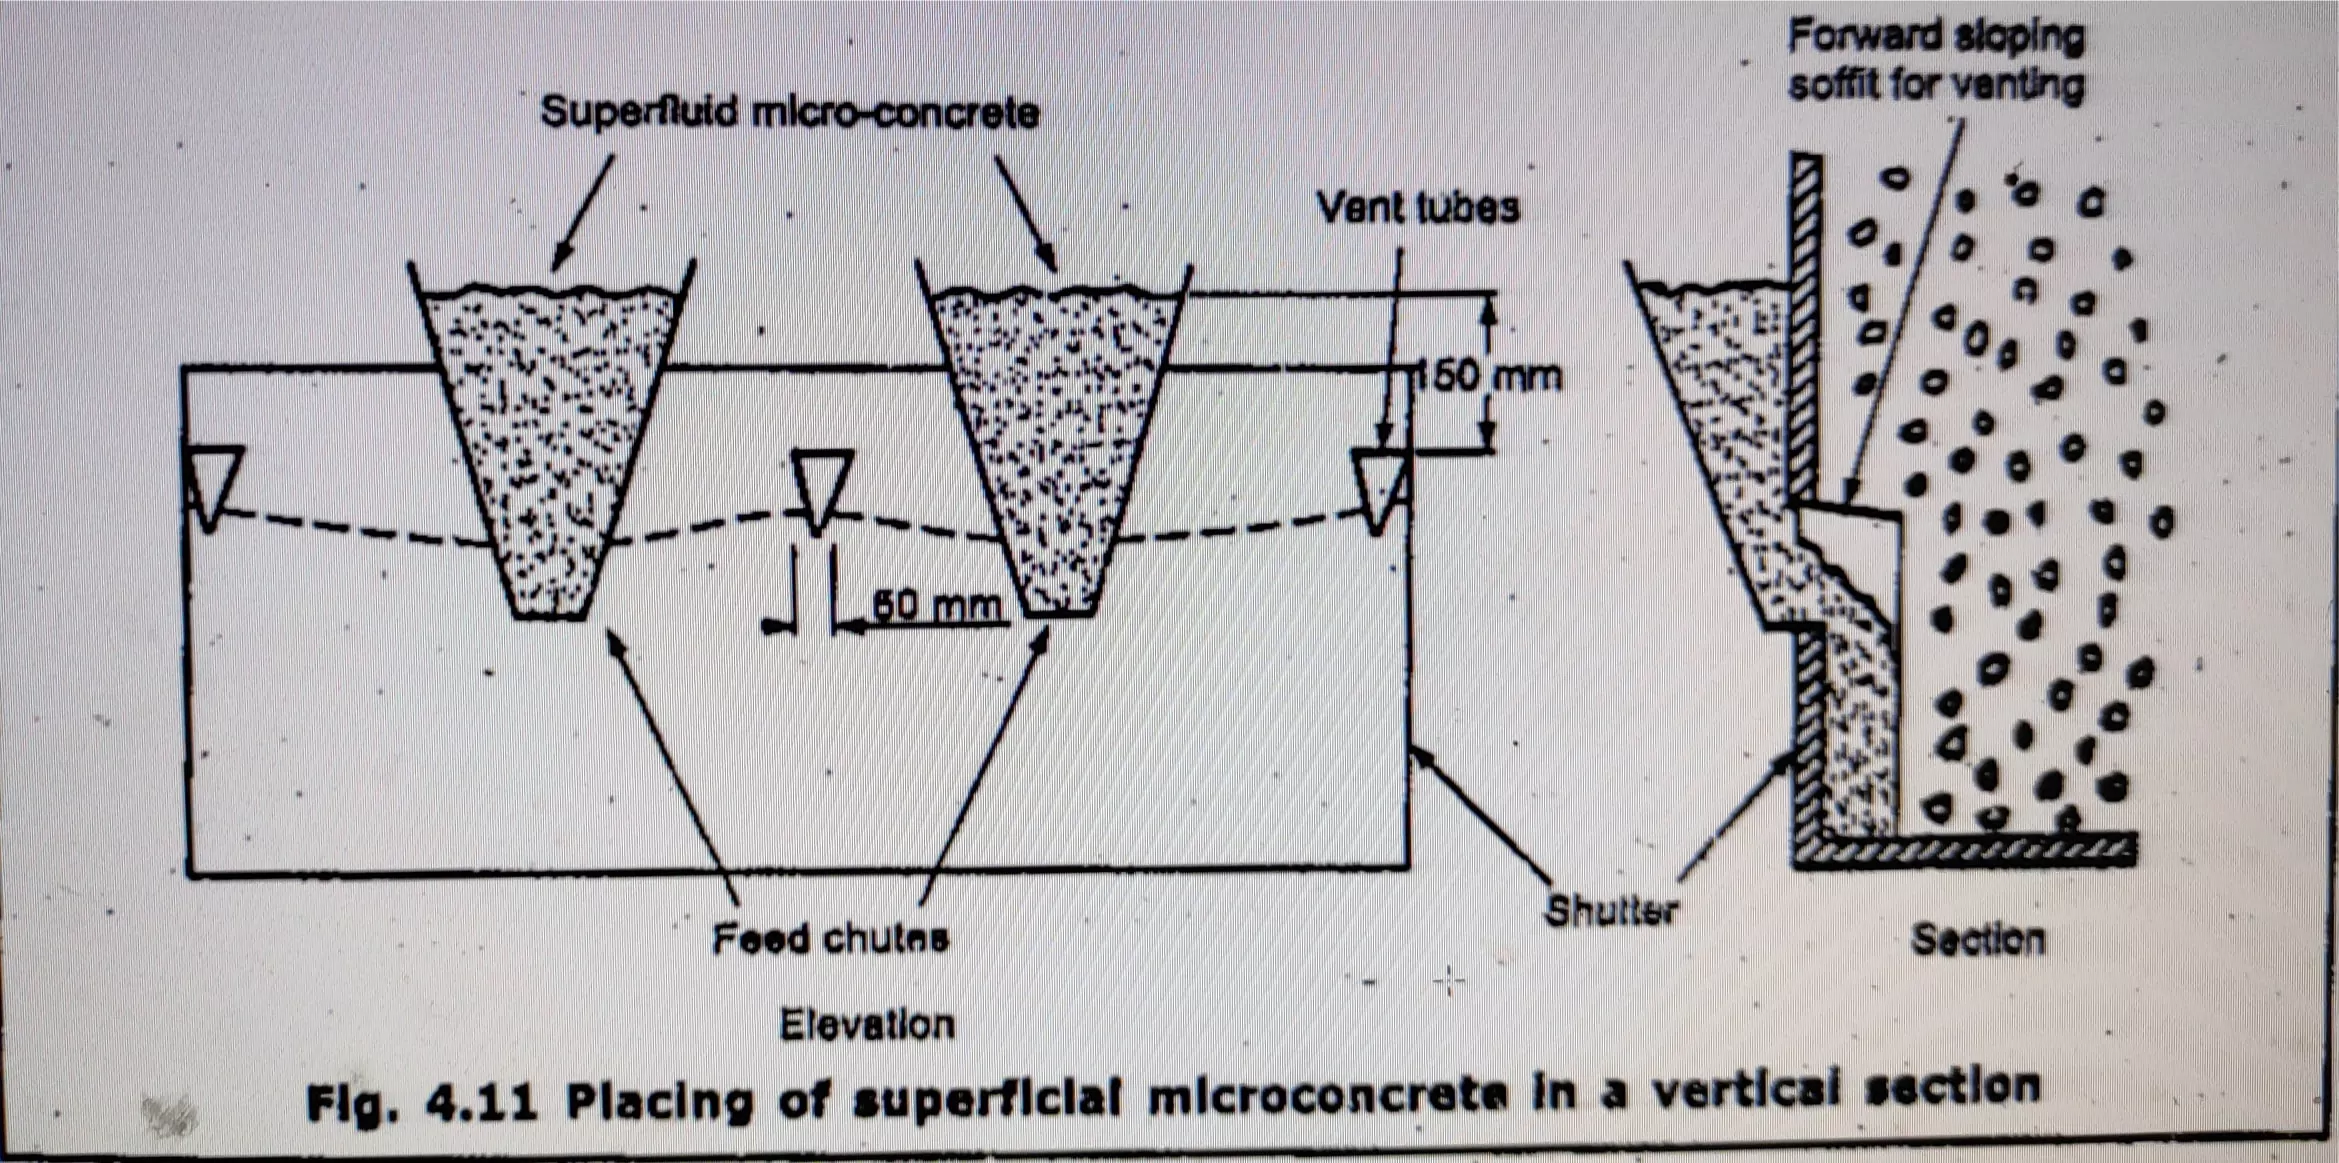 Placing of superficial micro concrete In a vertical section